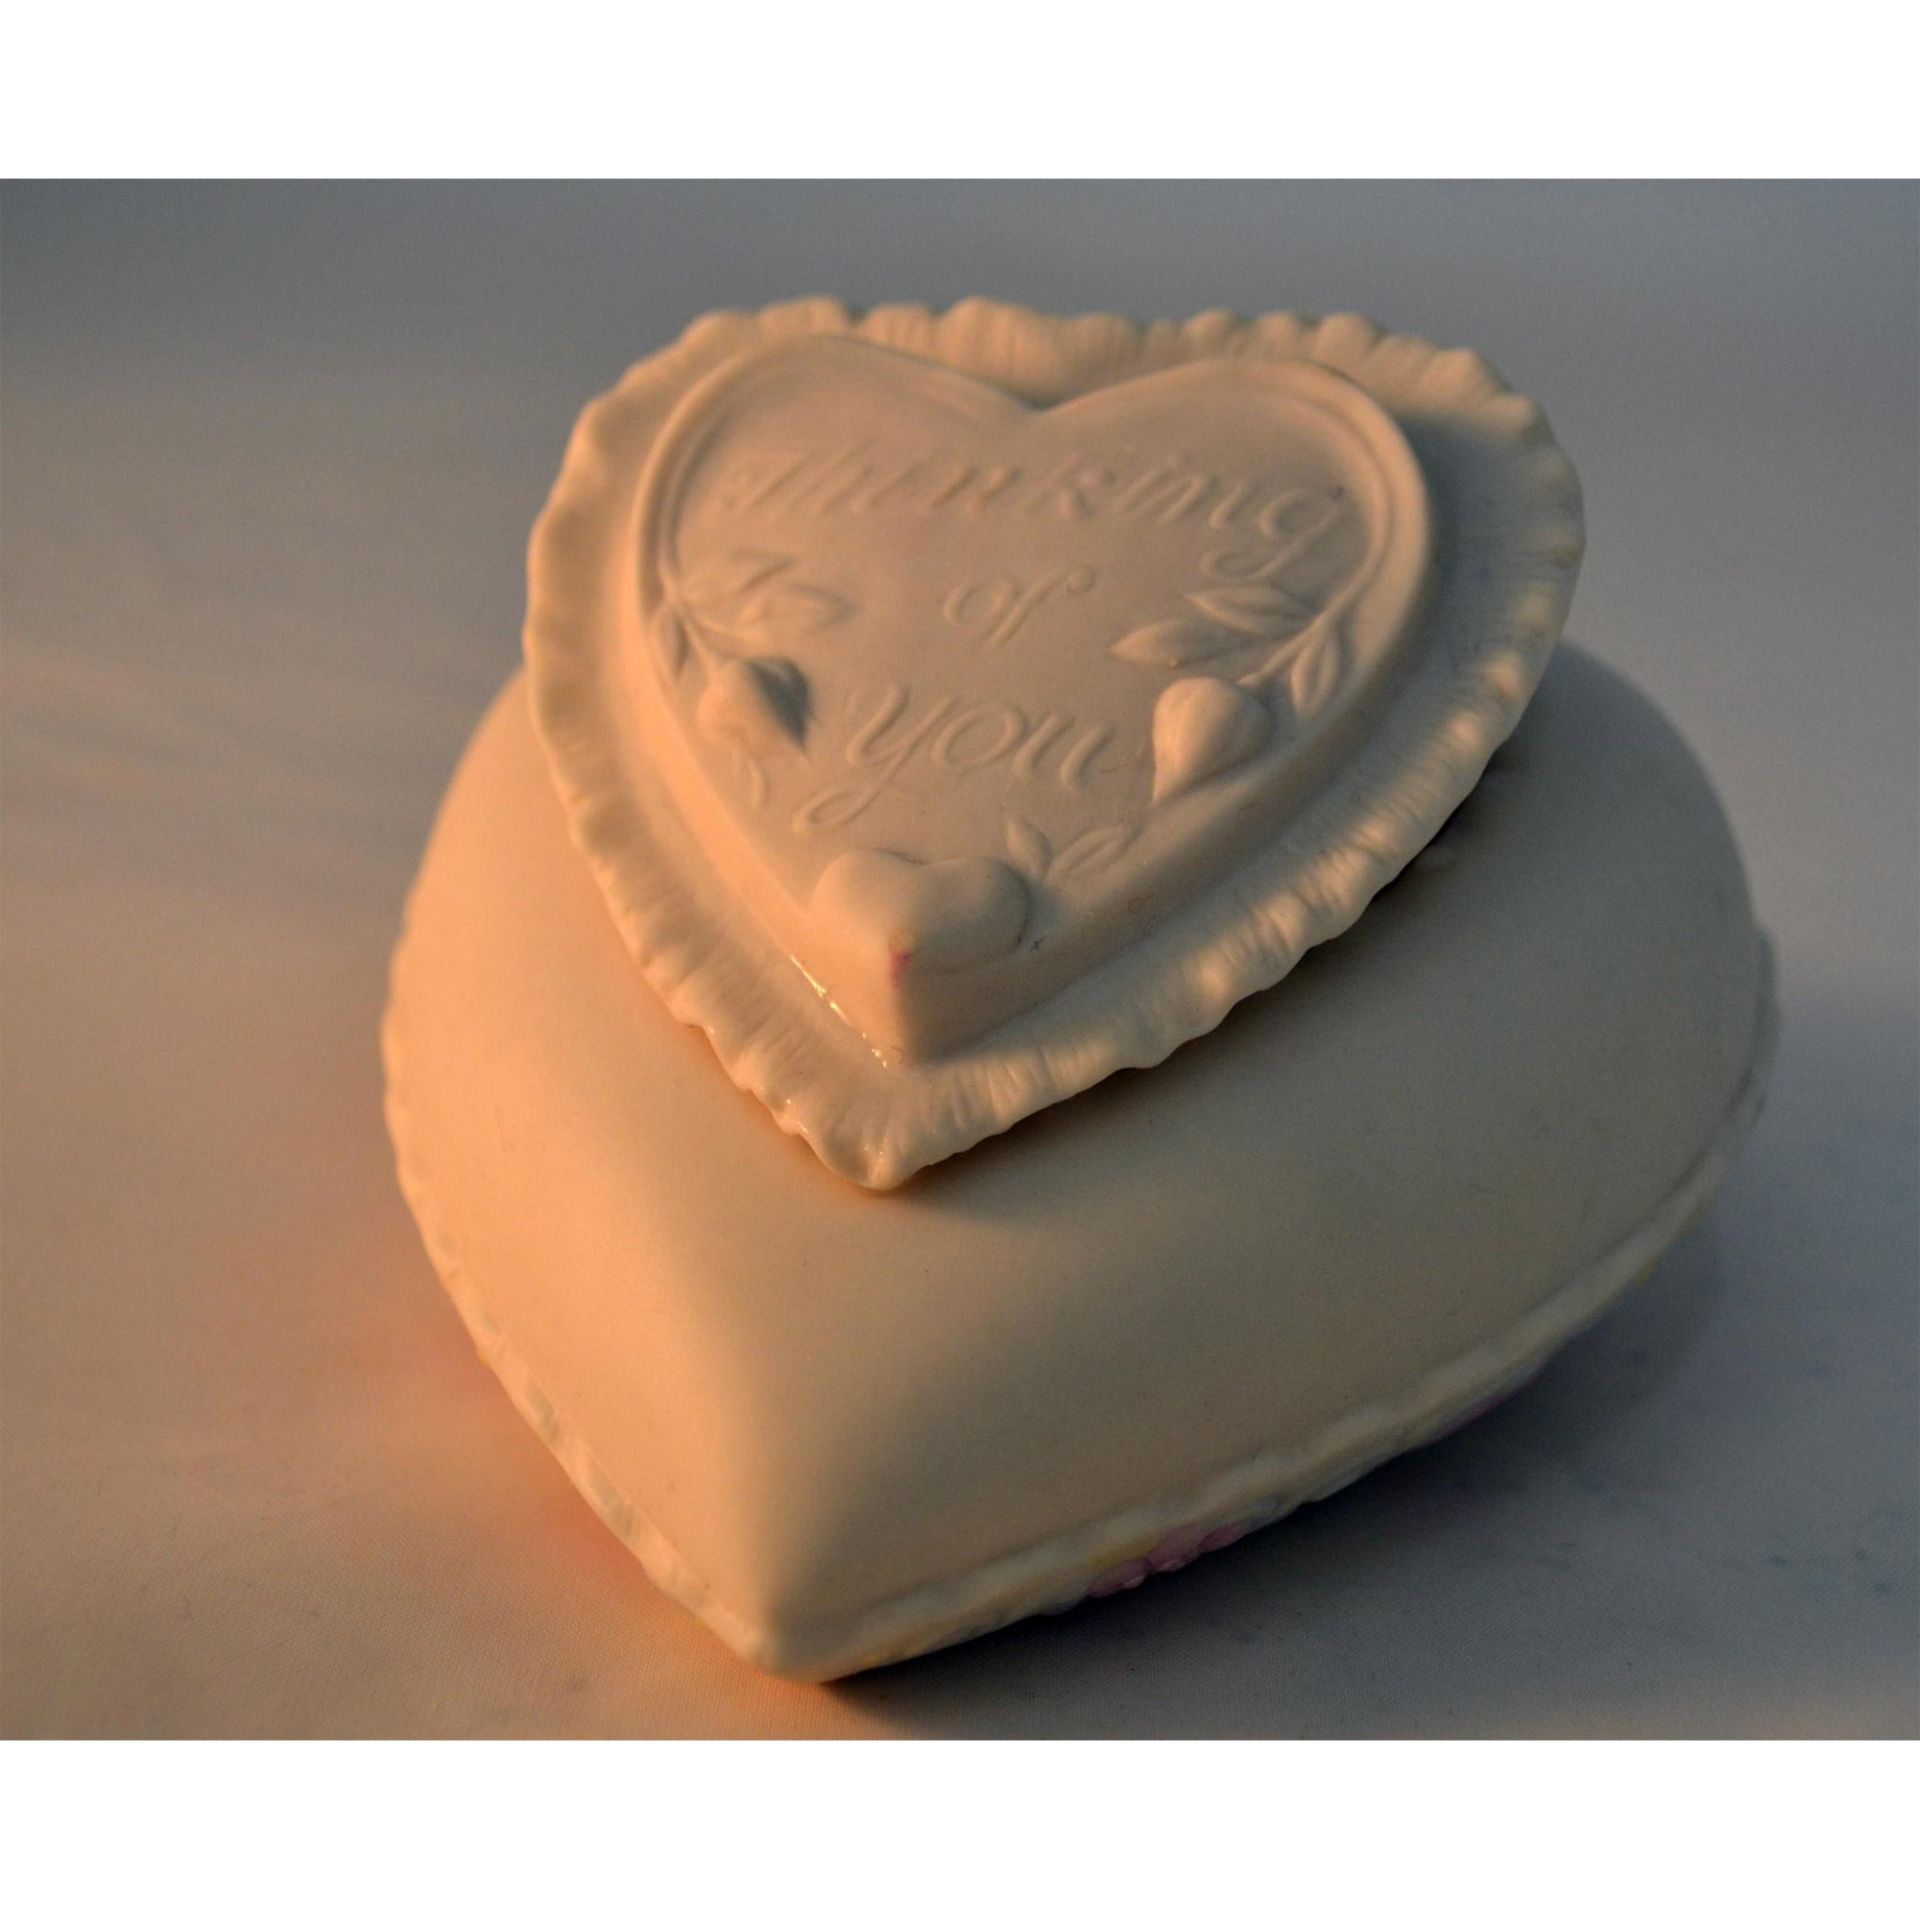 Cybis Porcelain Pastel Lidded Heart Box, Thinking Of You - Image 5 of 6